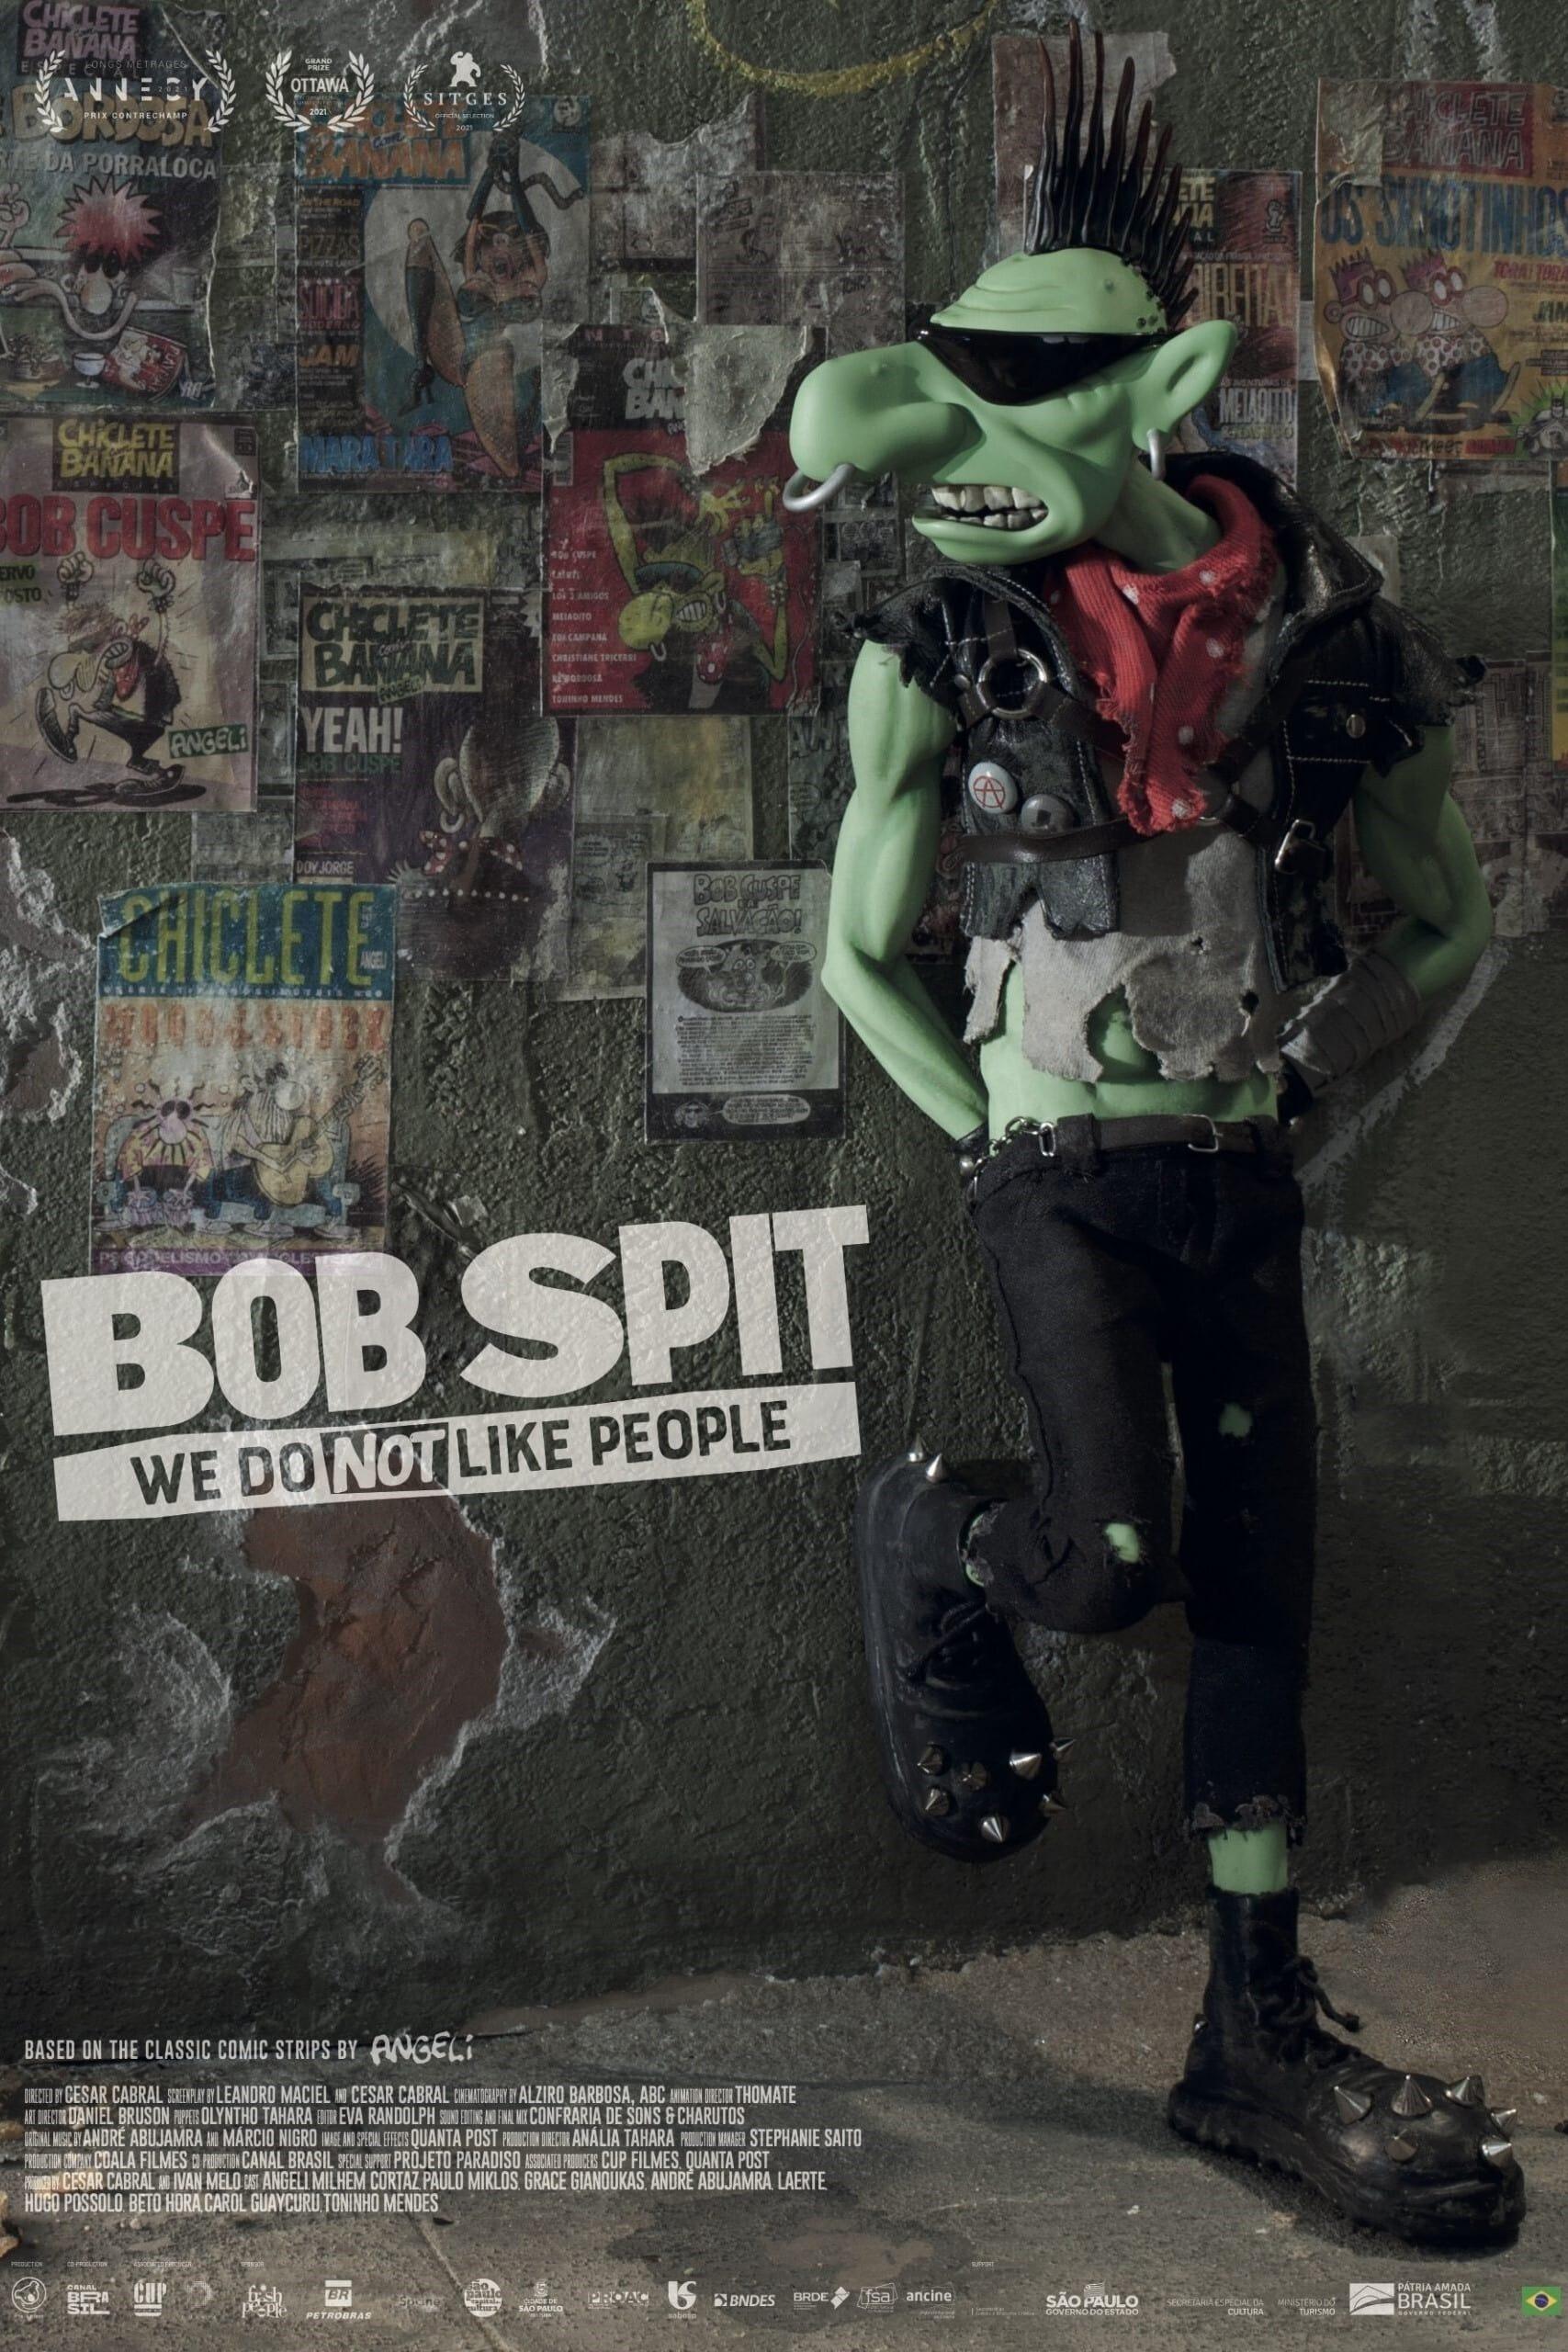 Bob Spit - We Do Not Like People poster